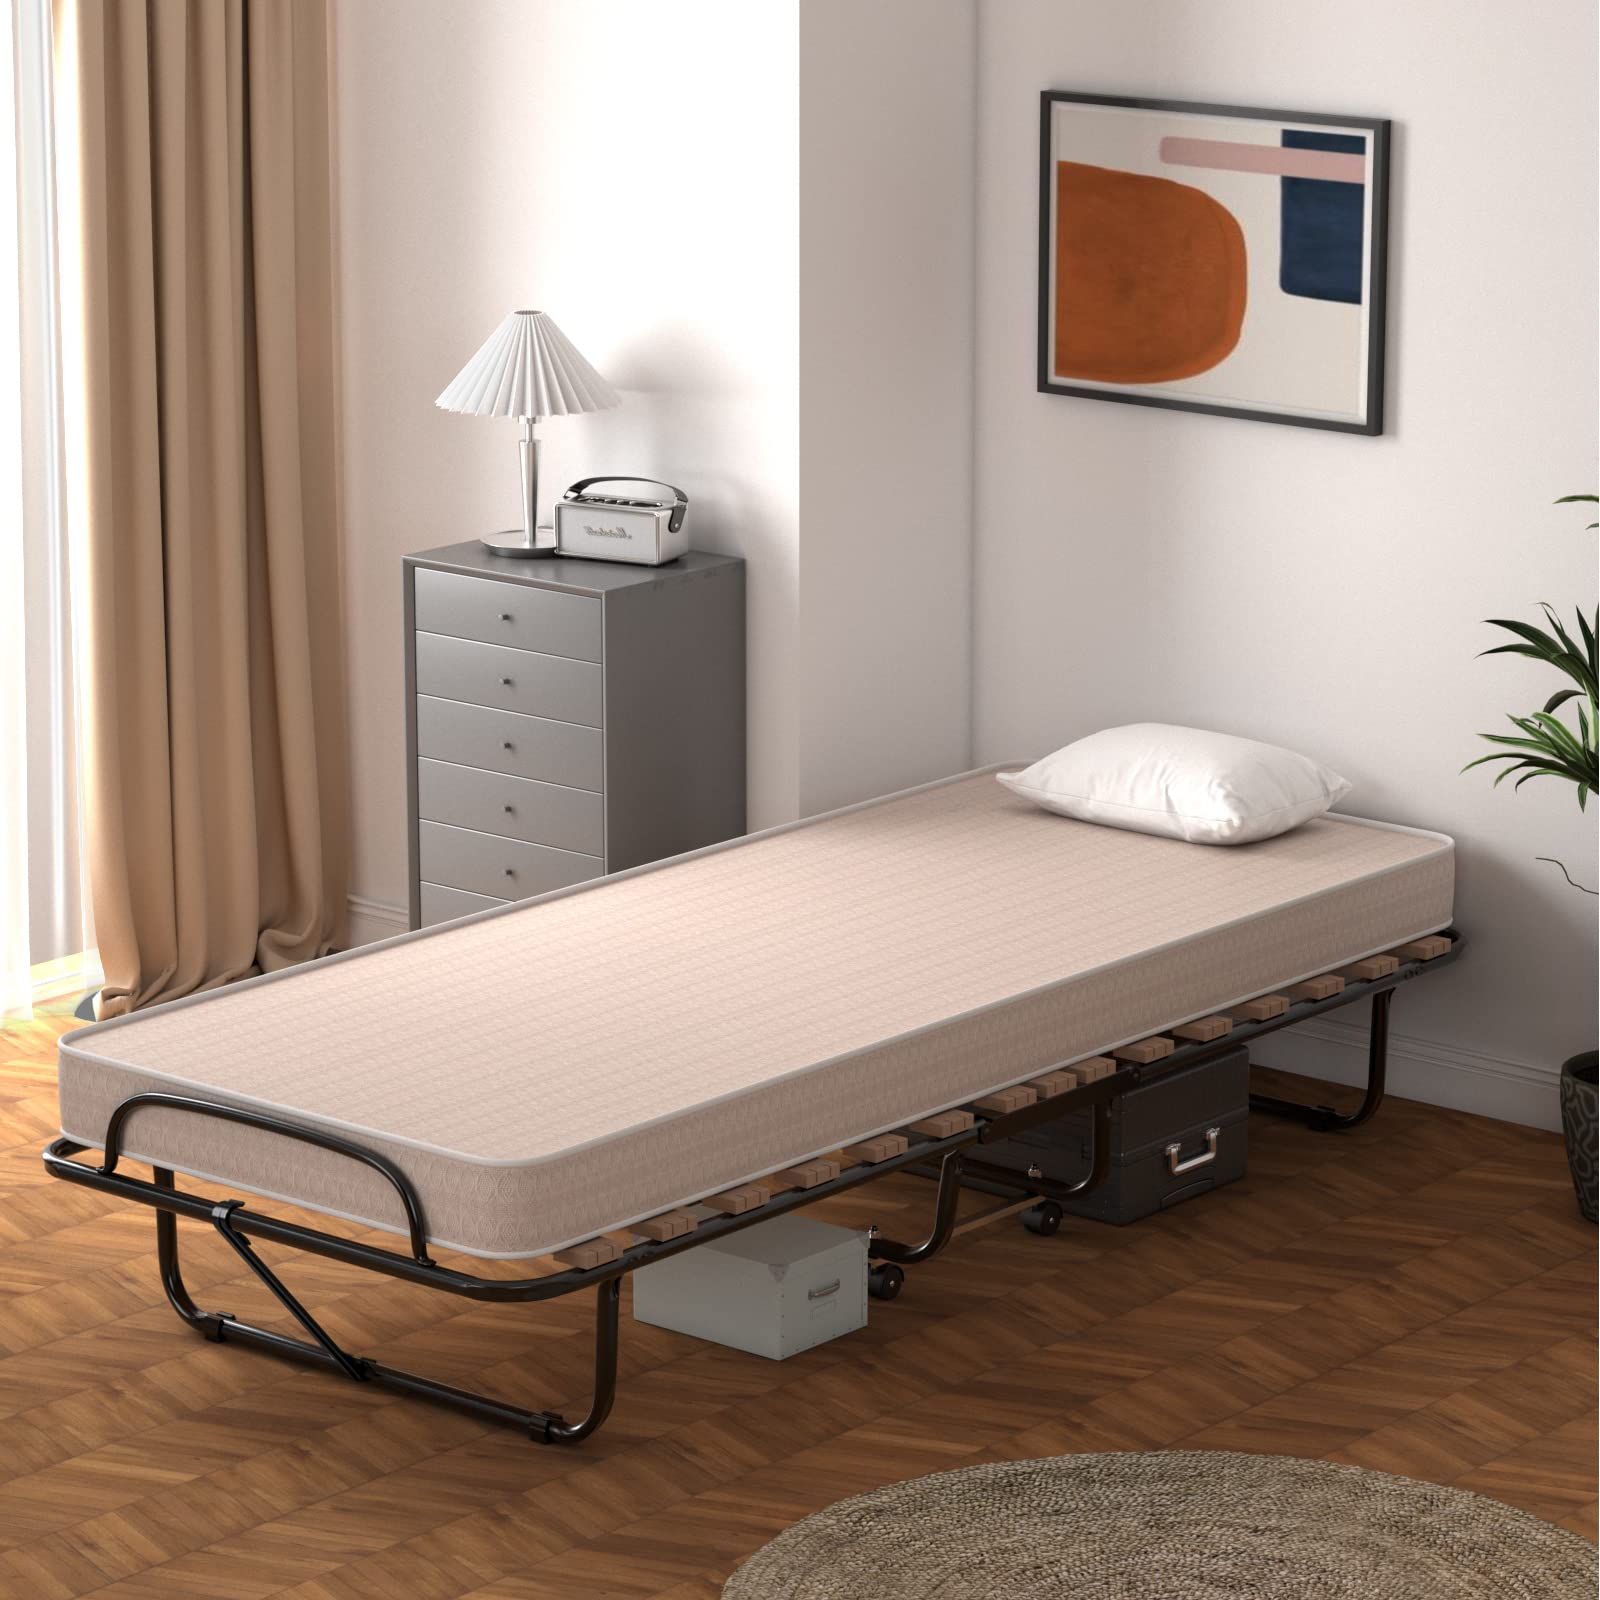 Giantex Folding Bed with Mattress for Adults, 75" x 32" Rollaway Guest Beds w/ 3 Inch Foam Mattress & Sturdy Metal Frame